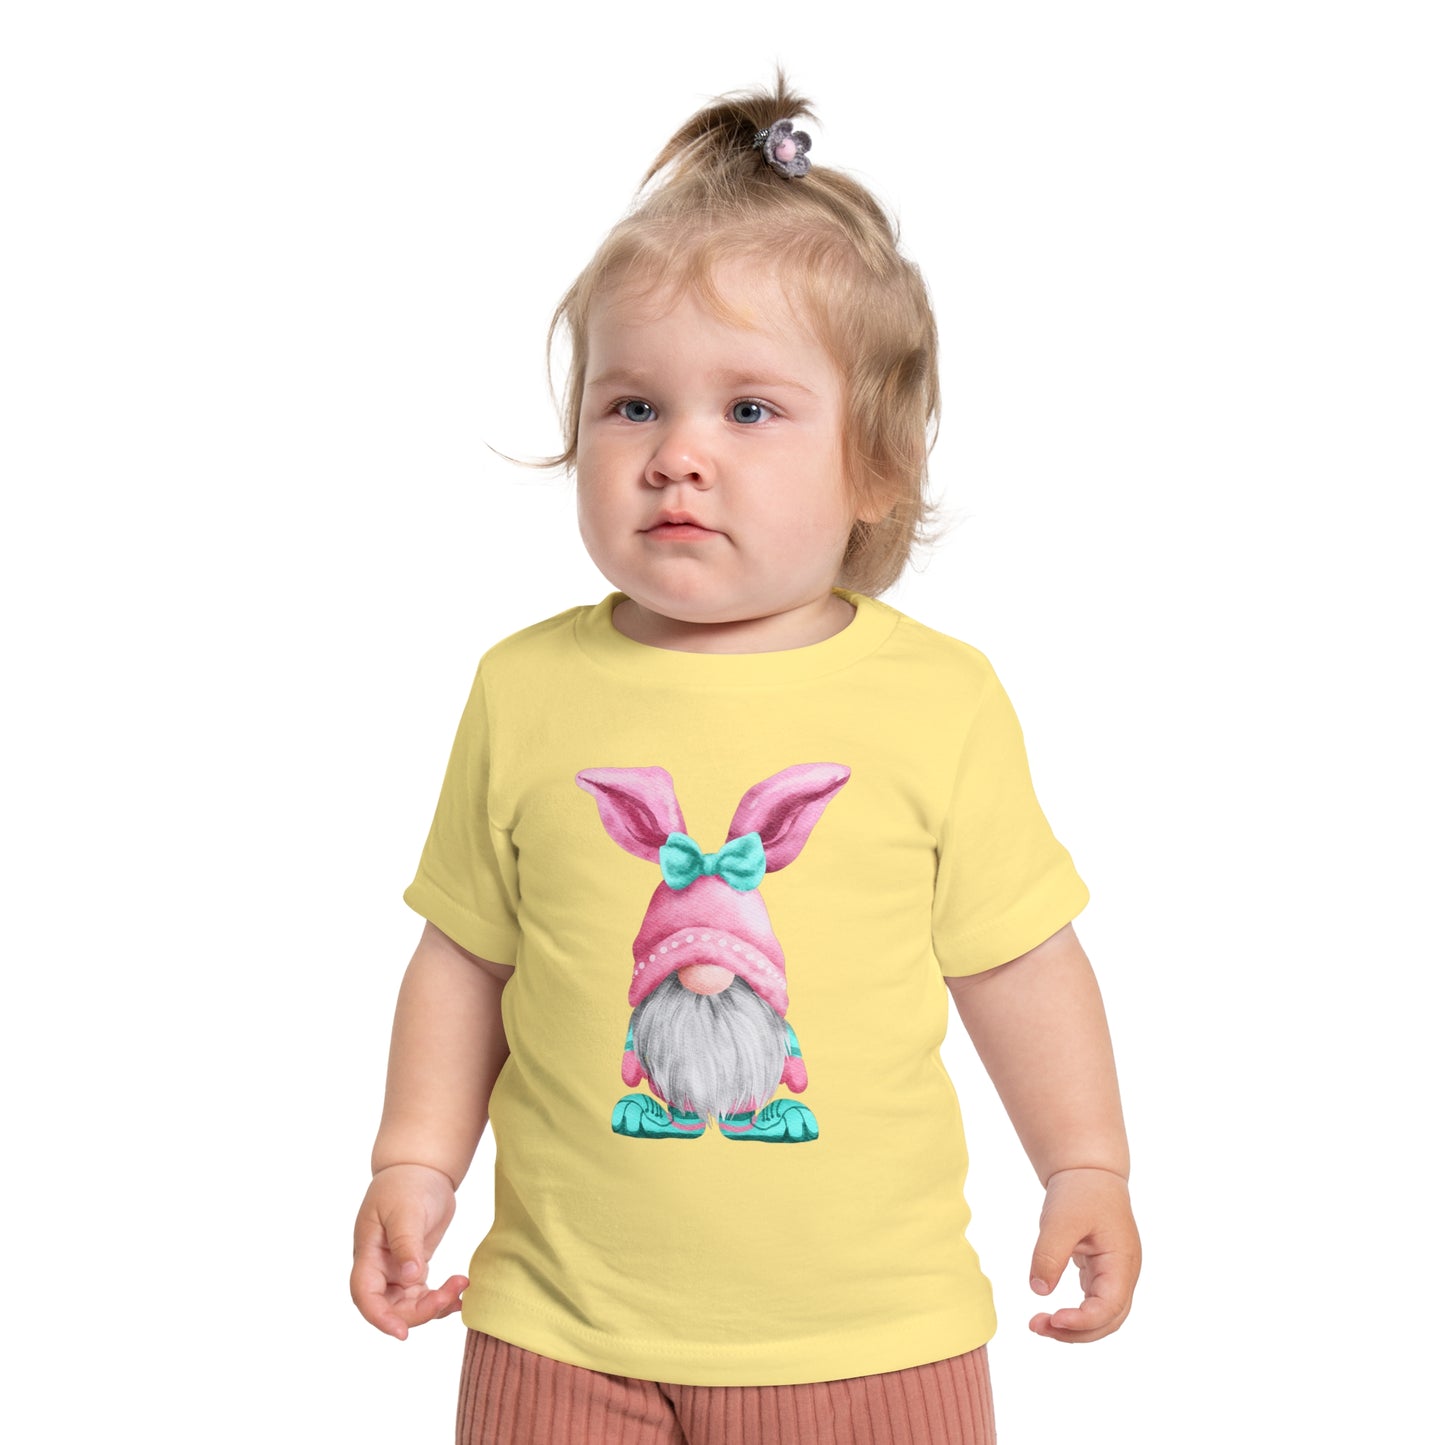 Toddler in a Printify Baby's Easter-Gnome T-shirt featuring a cartoon bunny print, looking to the side.